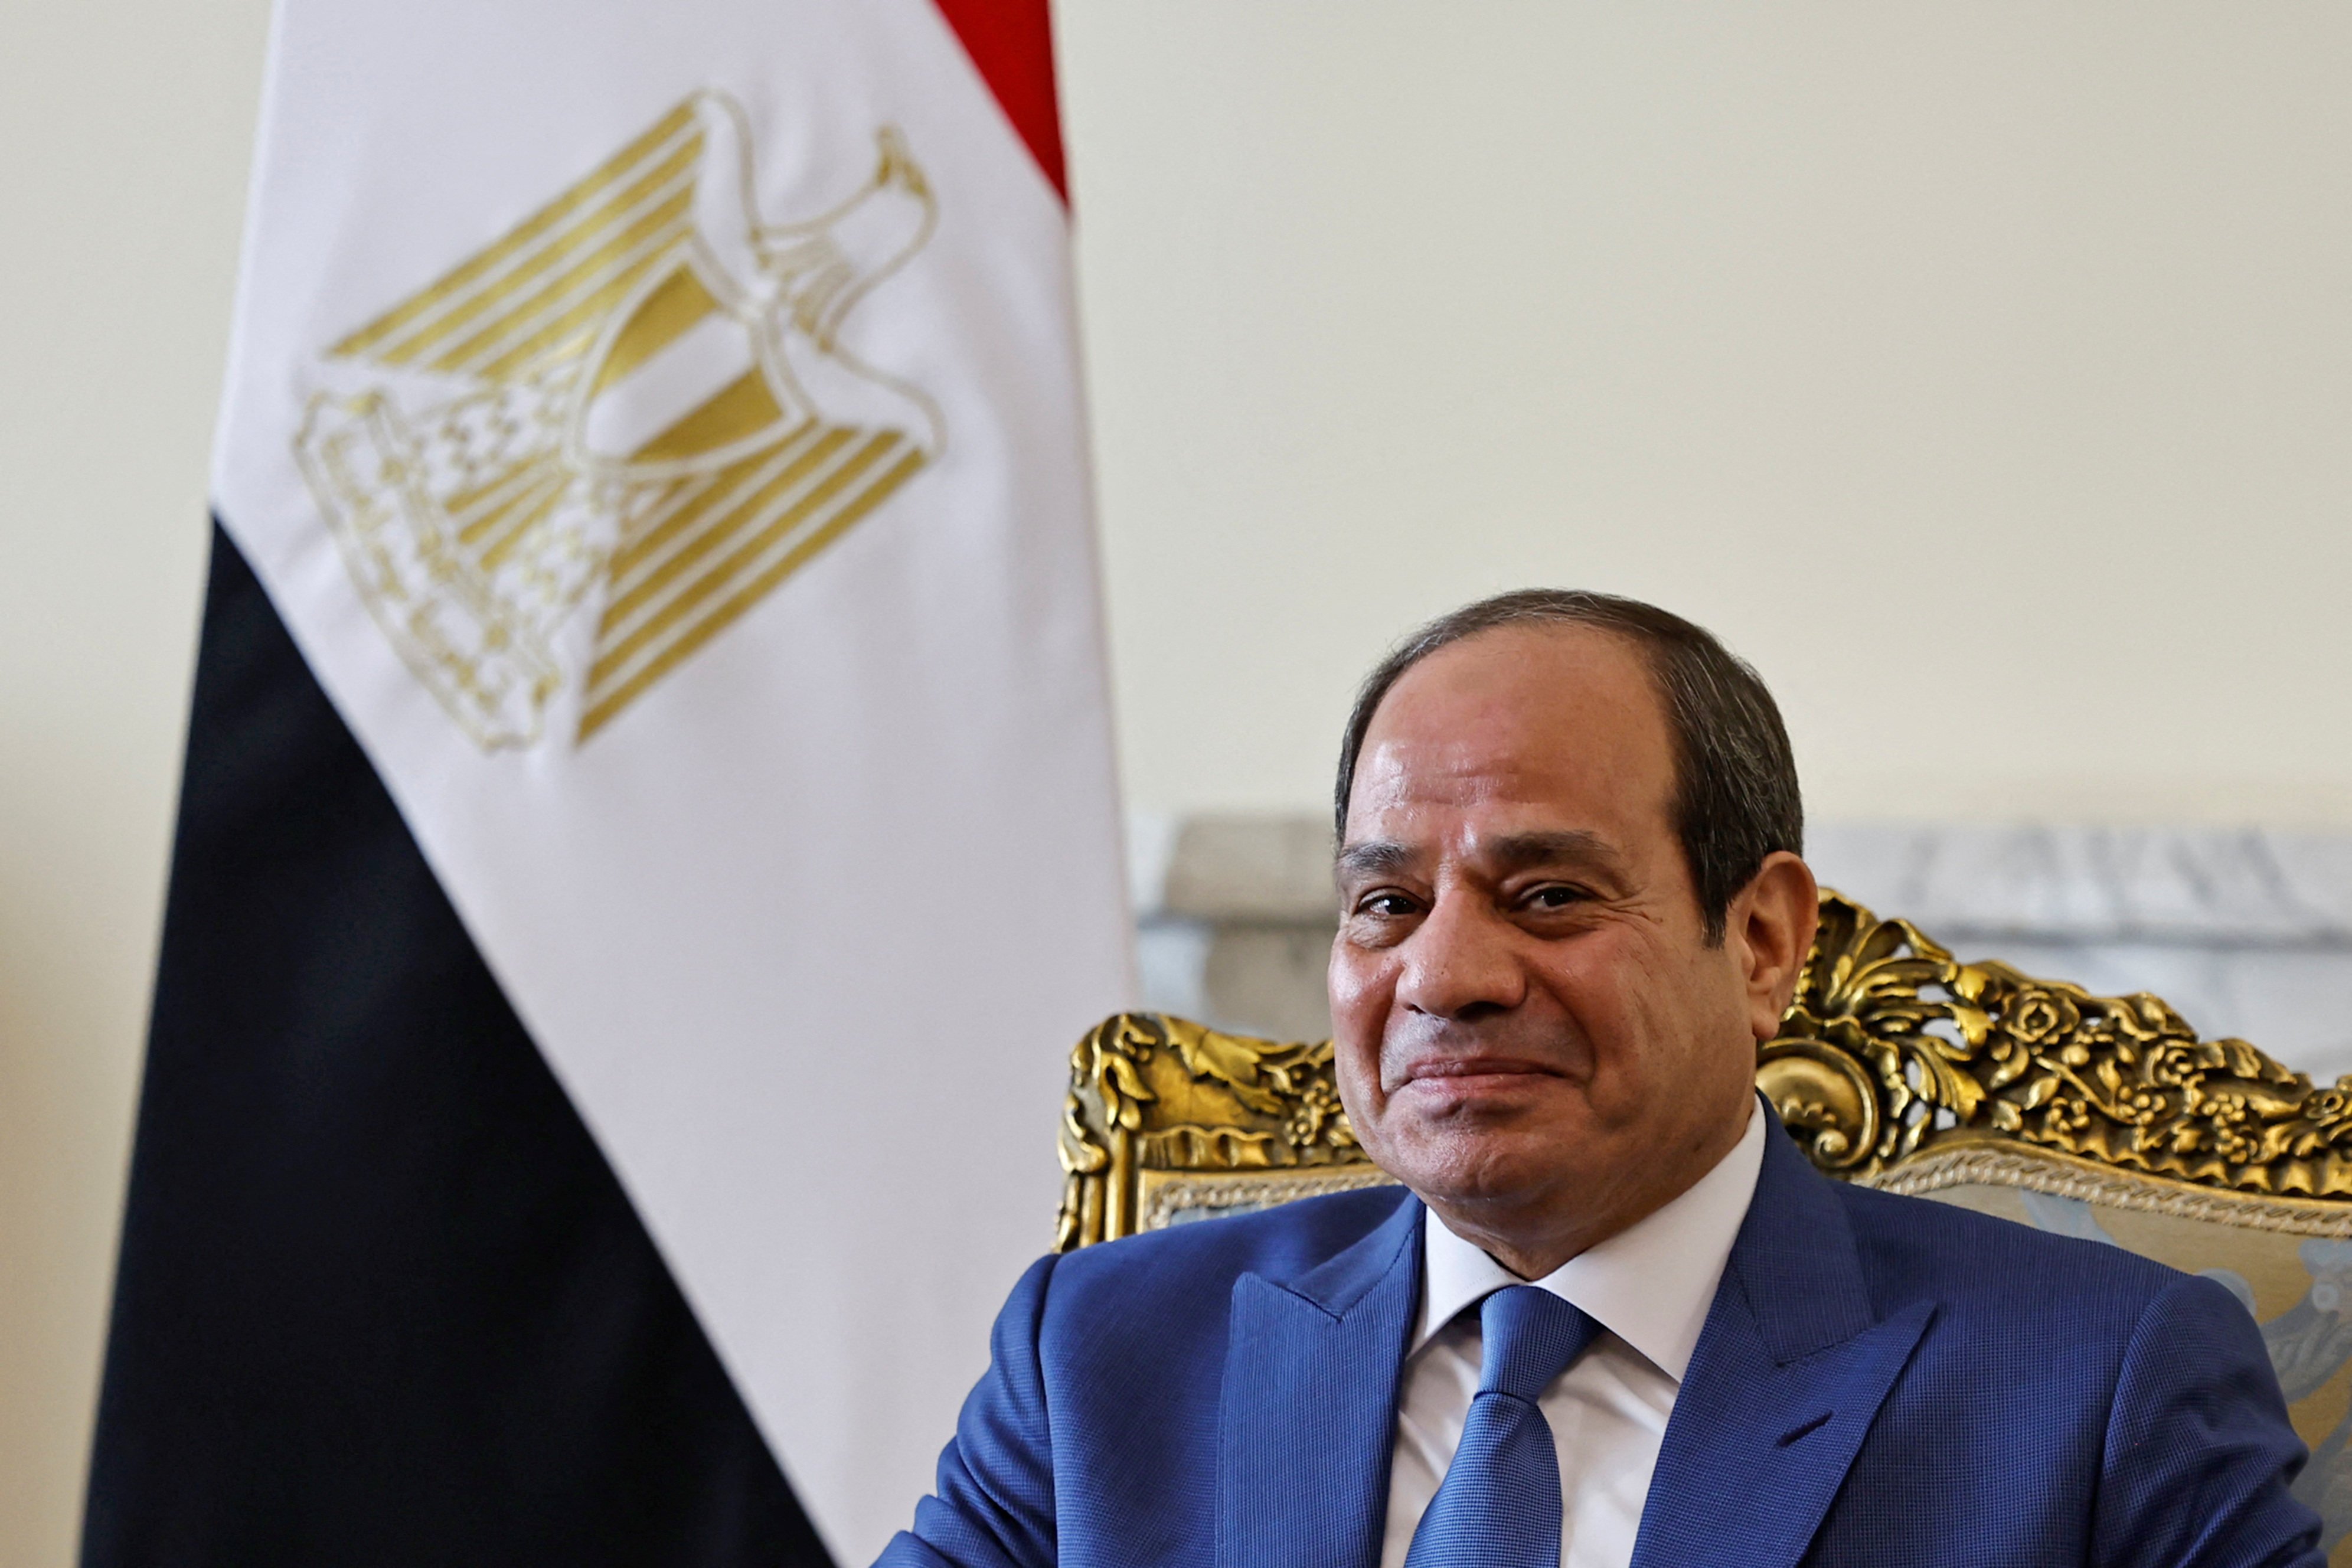 Egyptian President Abdel Fattah al-Sisi denies there are political prisoners in Egypt. He says stability and security are paramount. Photo: Reuters